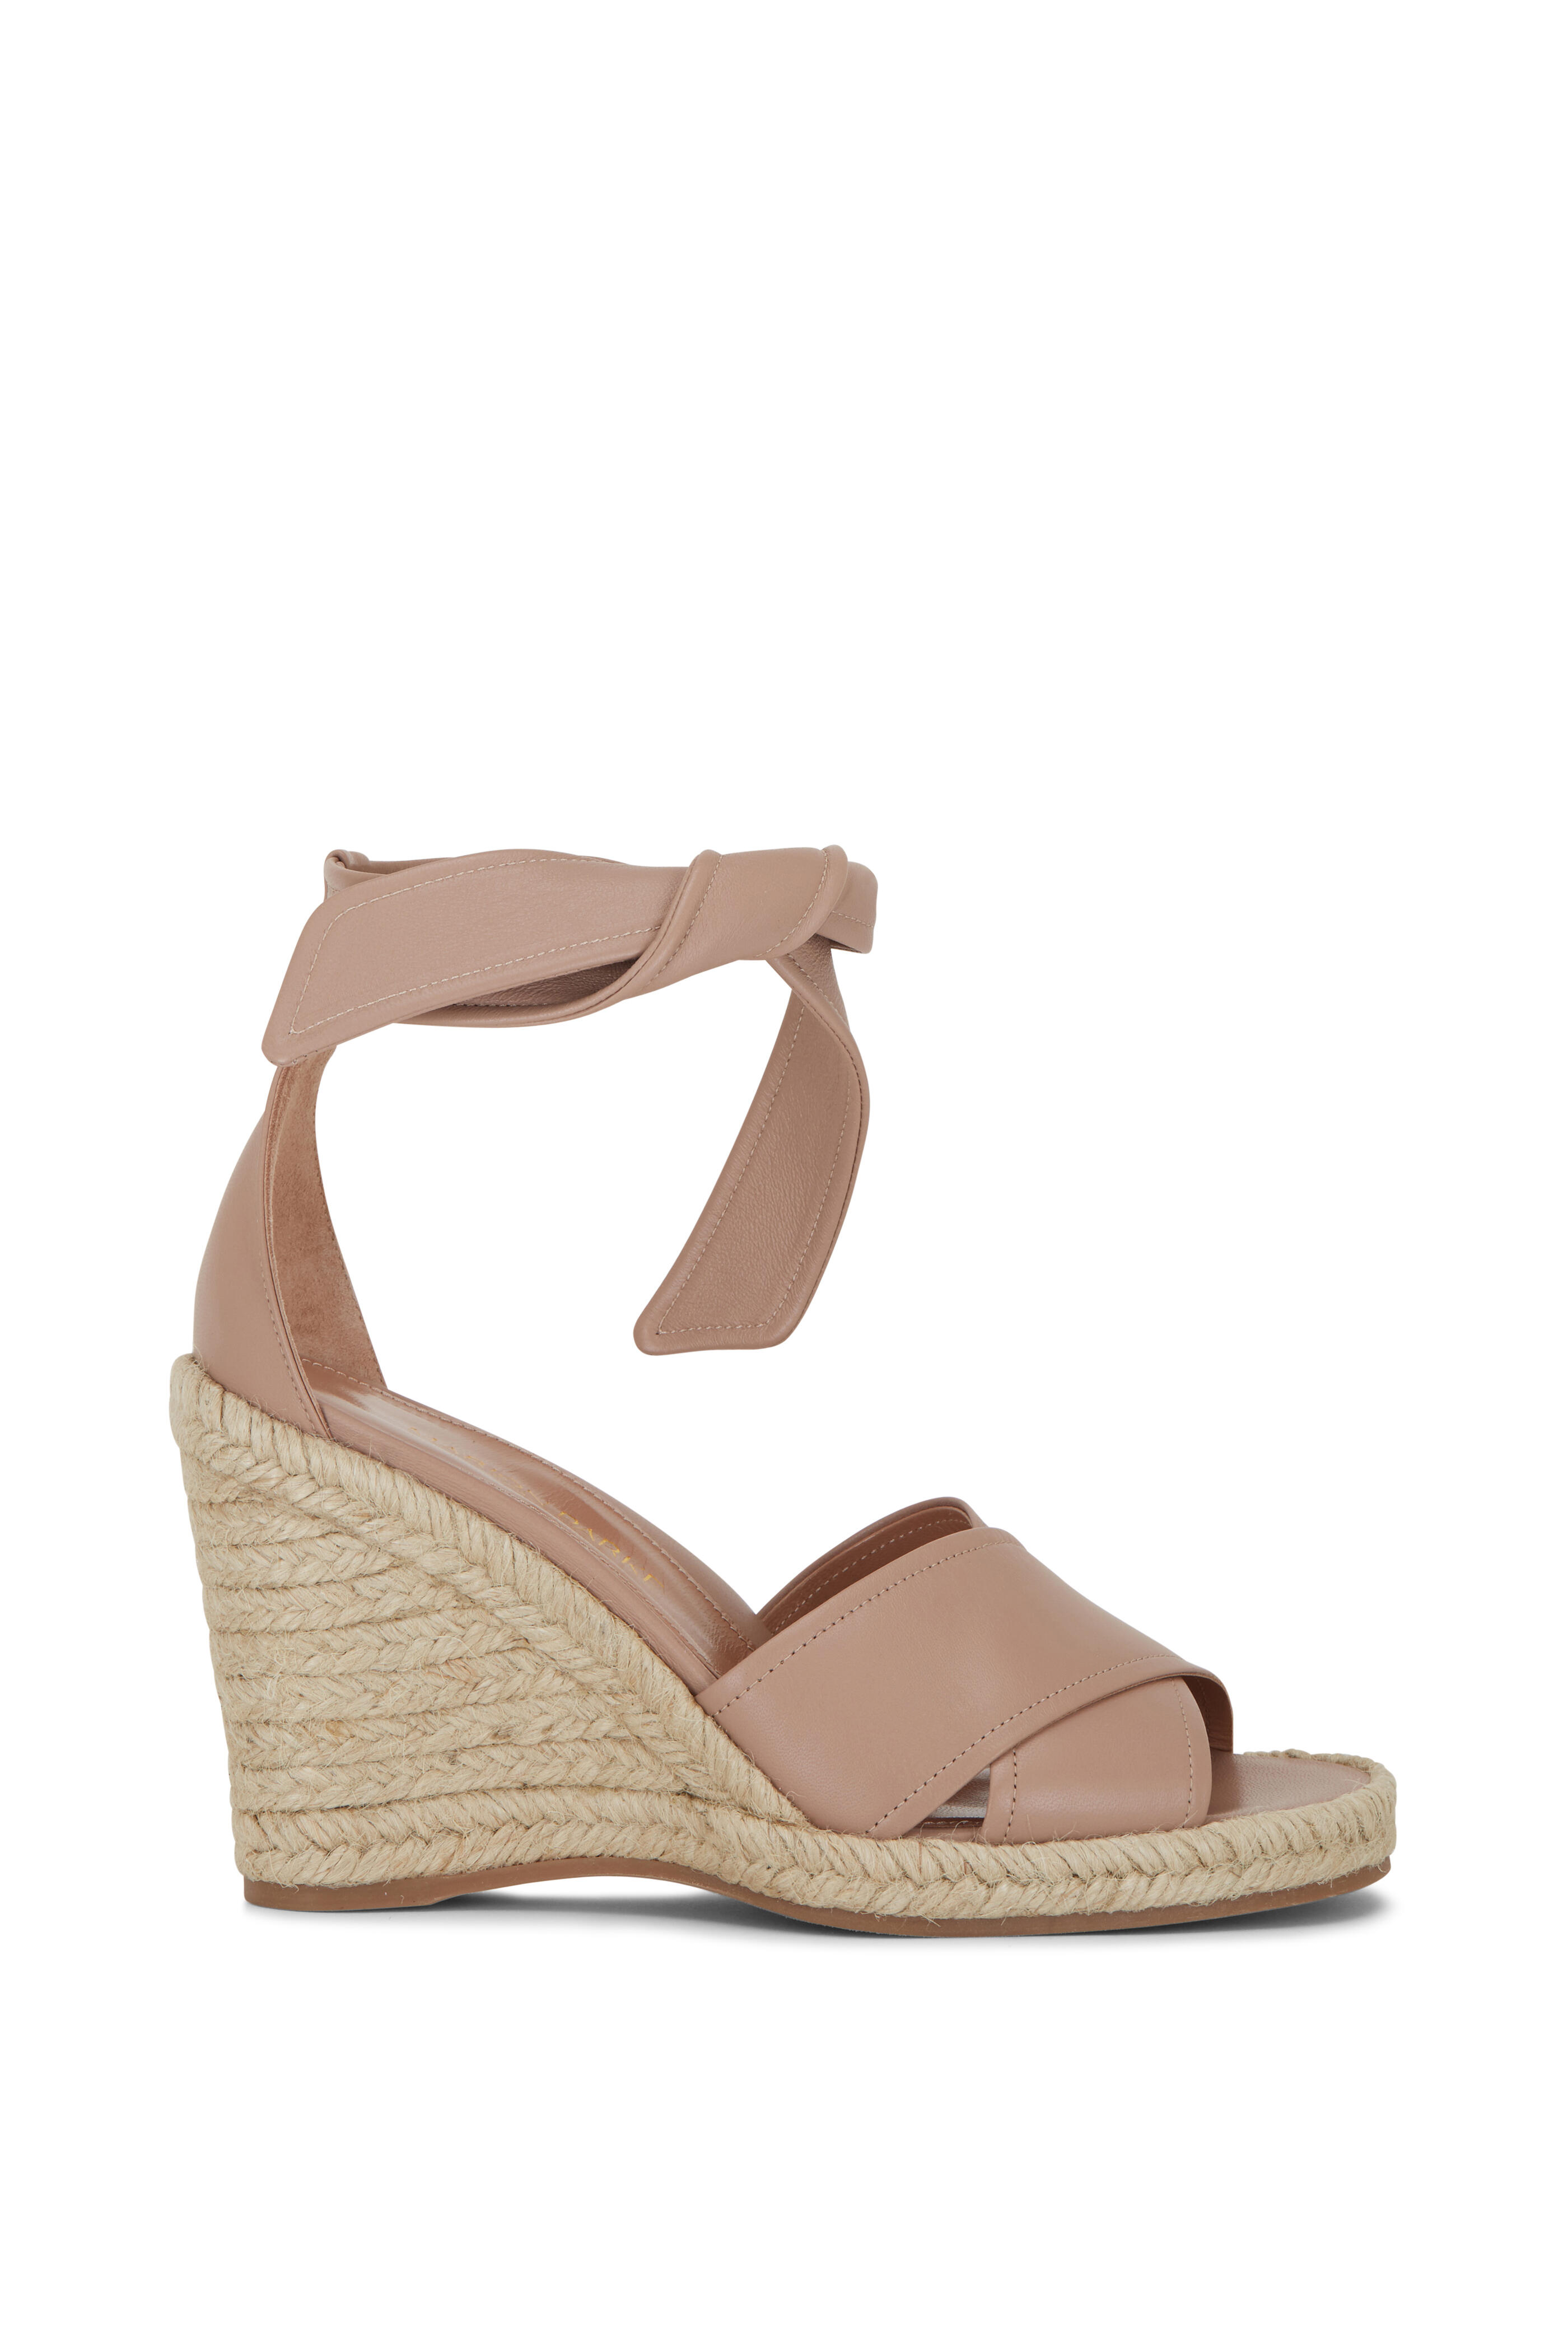 Marion Parke - Mitchell Sand Leather Multi Strap Pump, 85mm